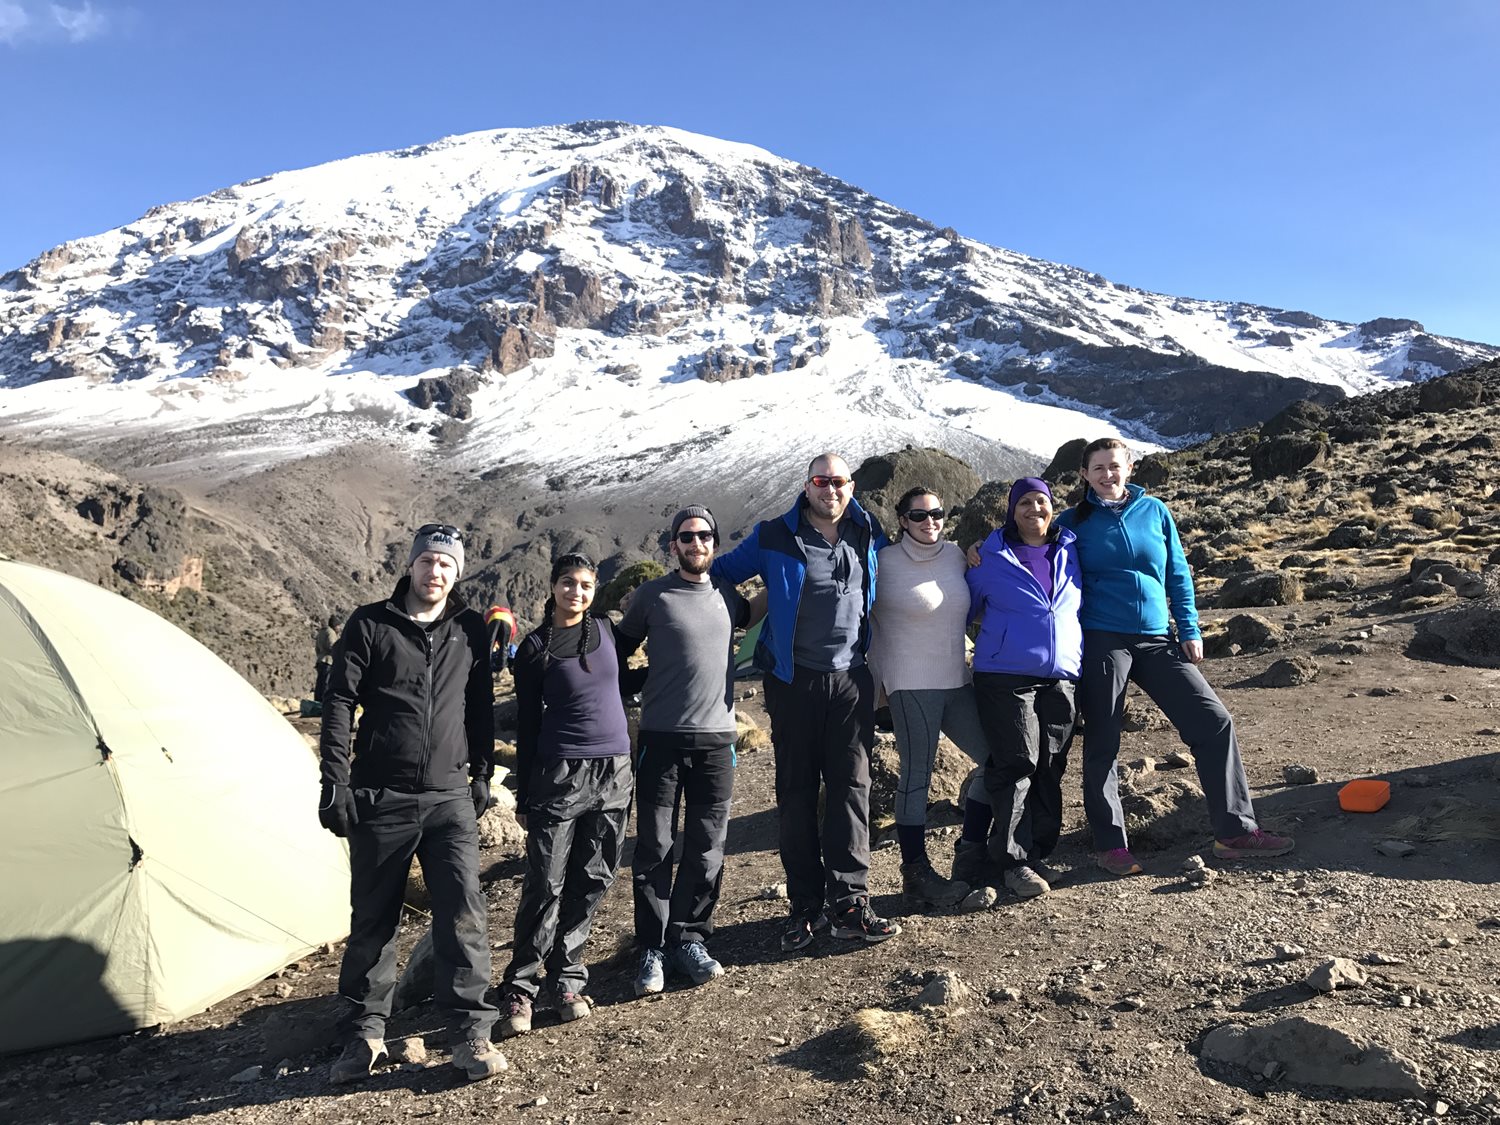 Select team of intrepid explorers conquer Kilimanjaro - each personally affected by meningitis